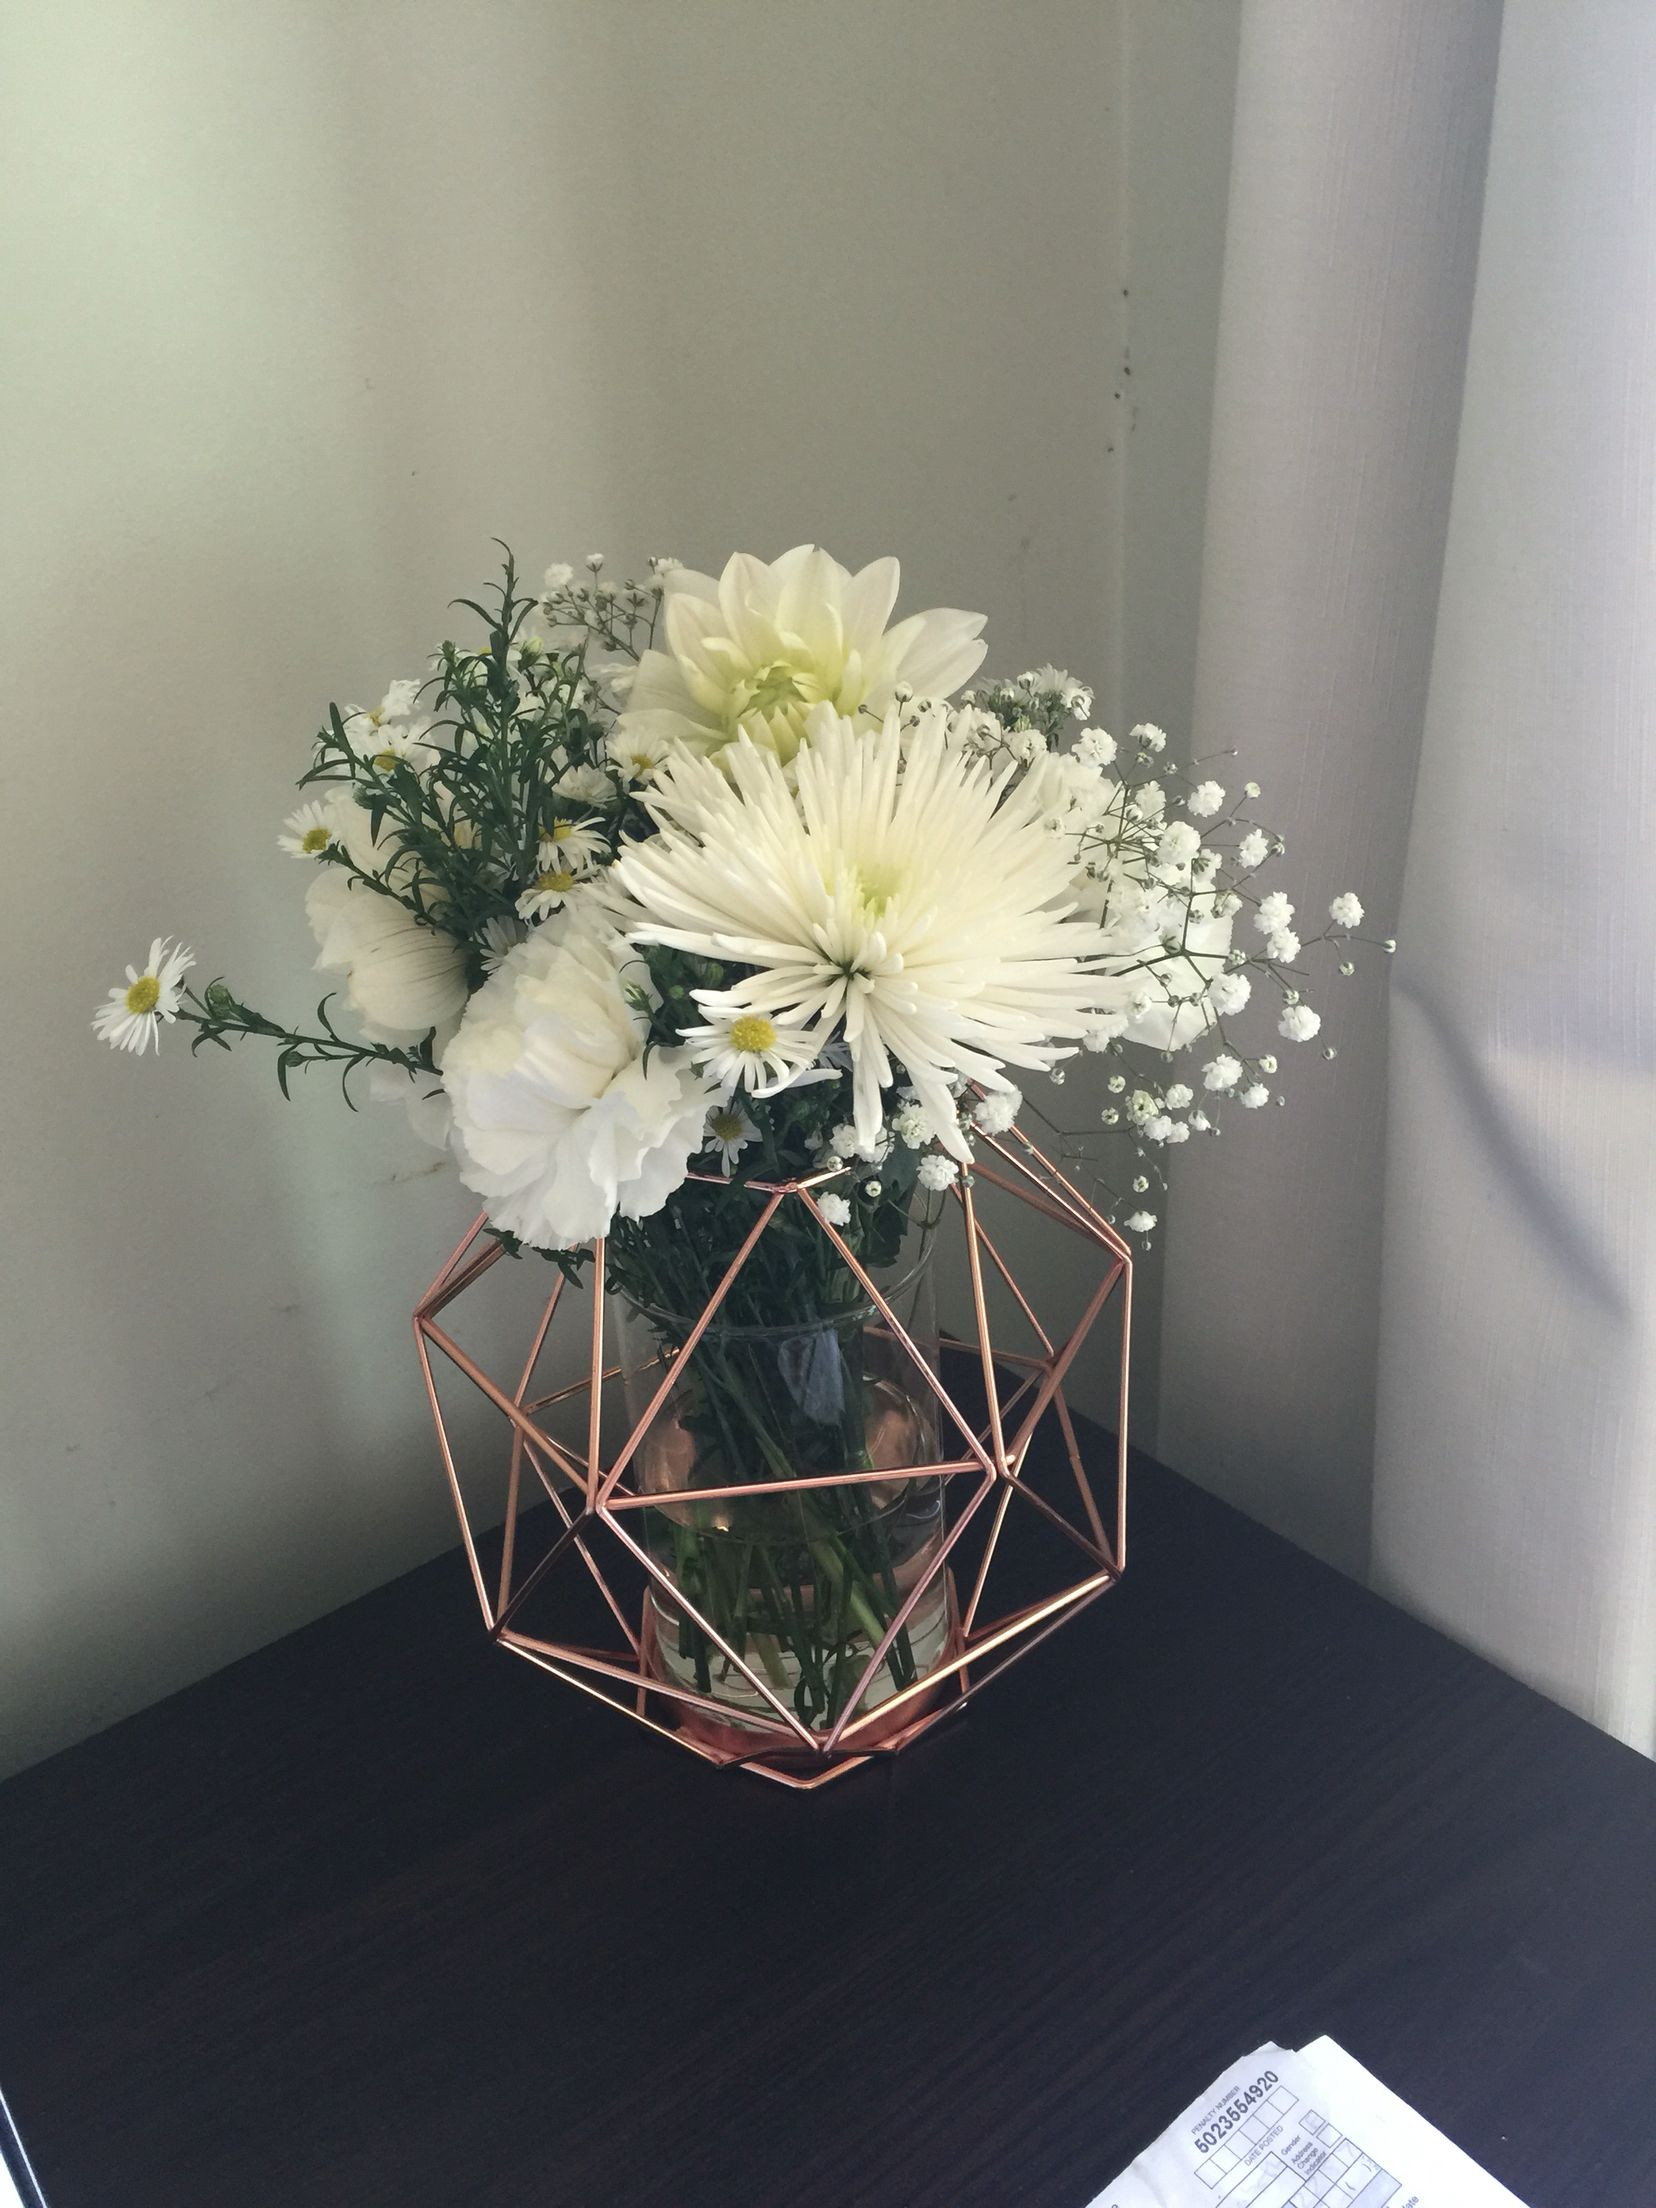 10 Elegant Unity Sand Vases with Stopper 2024 free download unity sand vases with stopper of copper geometric candle holder from kmart used as a vase wedding inside copper geometric candle holder from kmart used as a vase